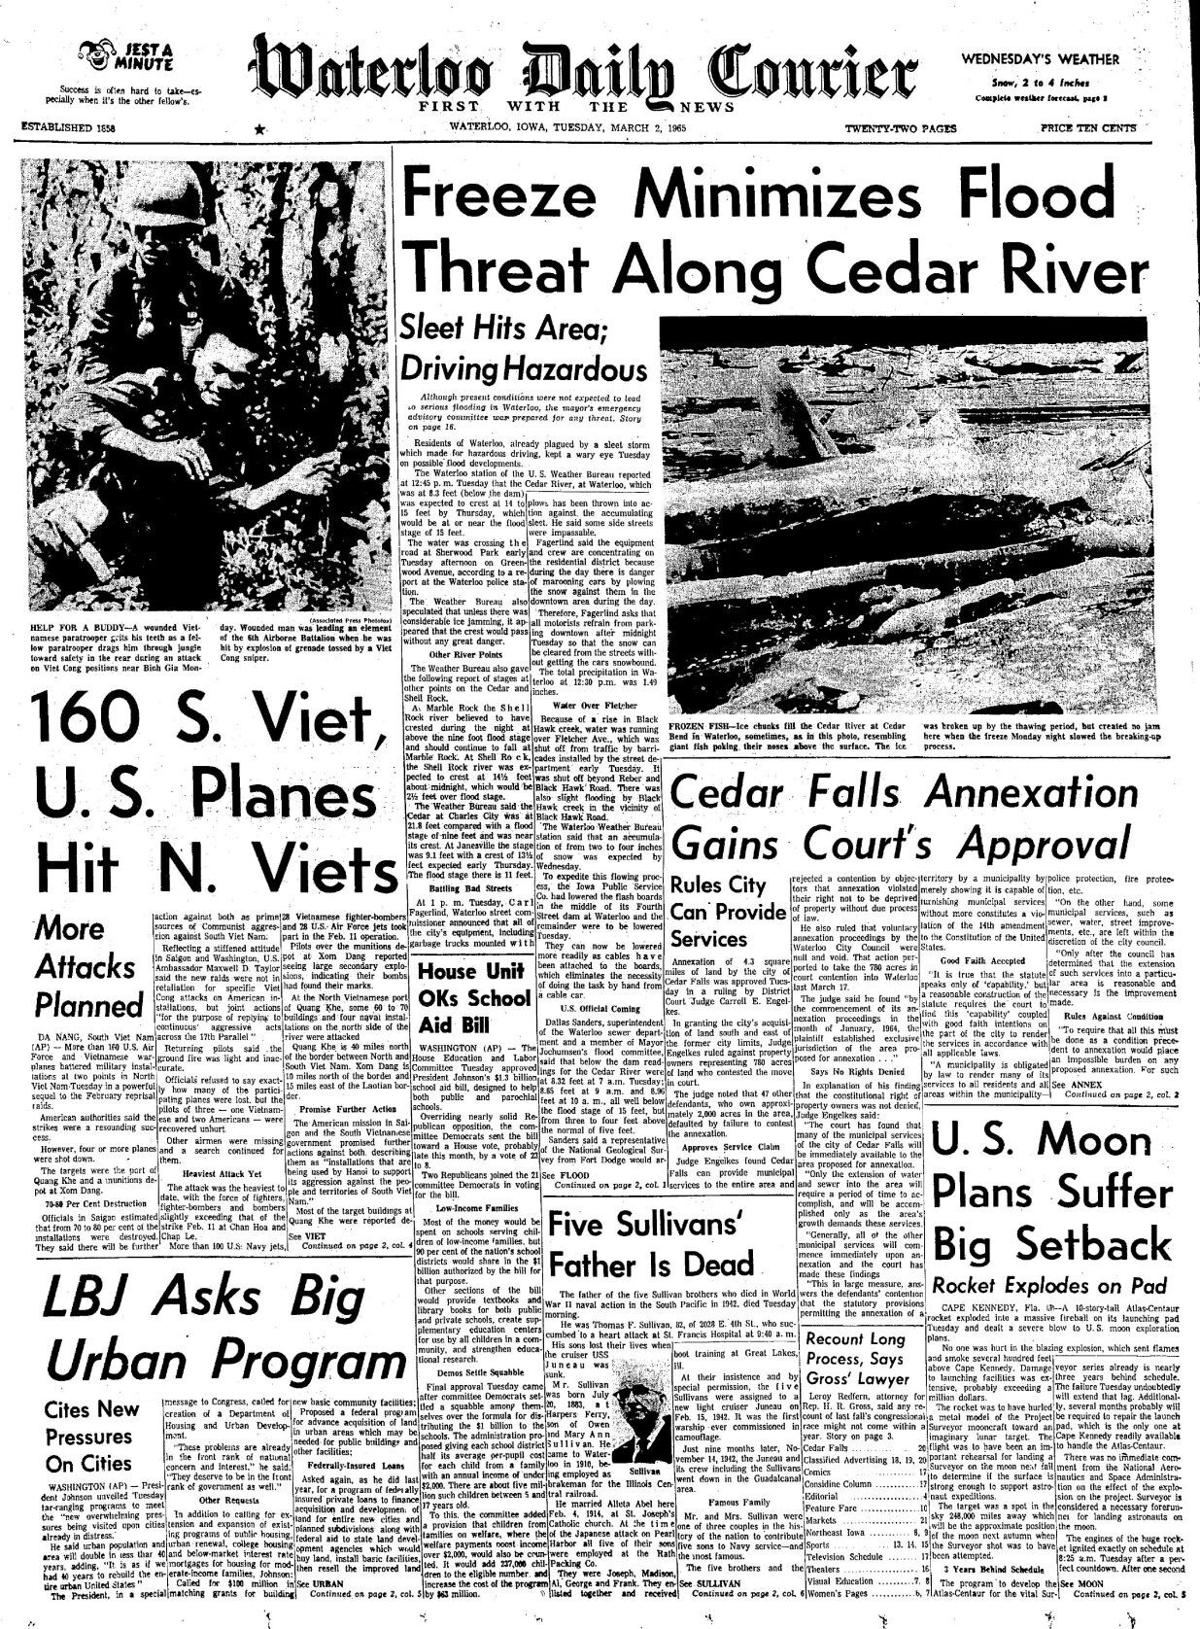 Courier March 2, 1965